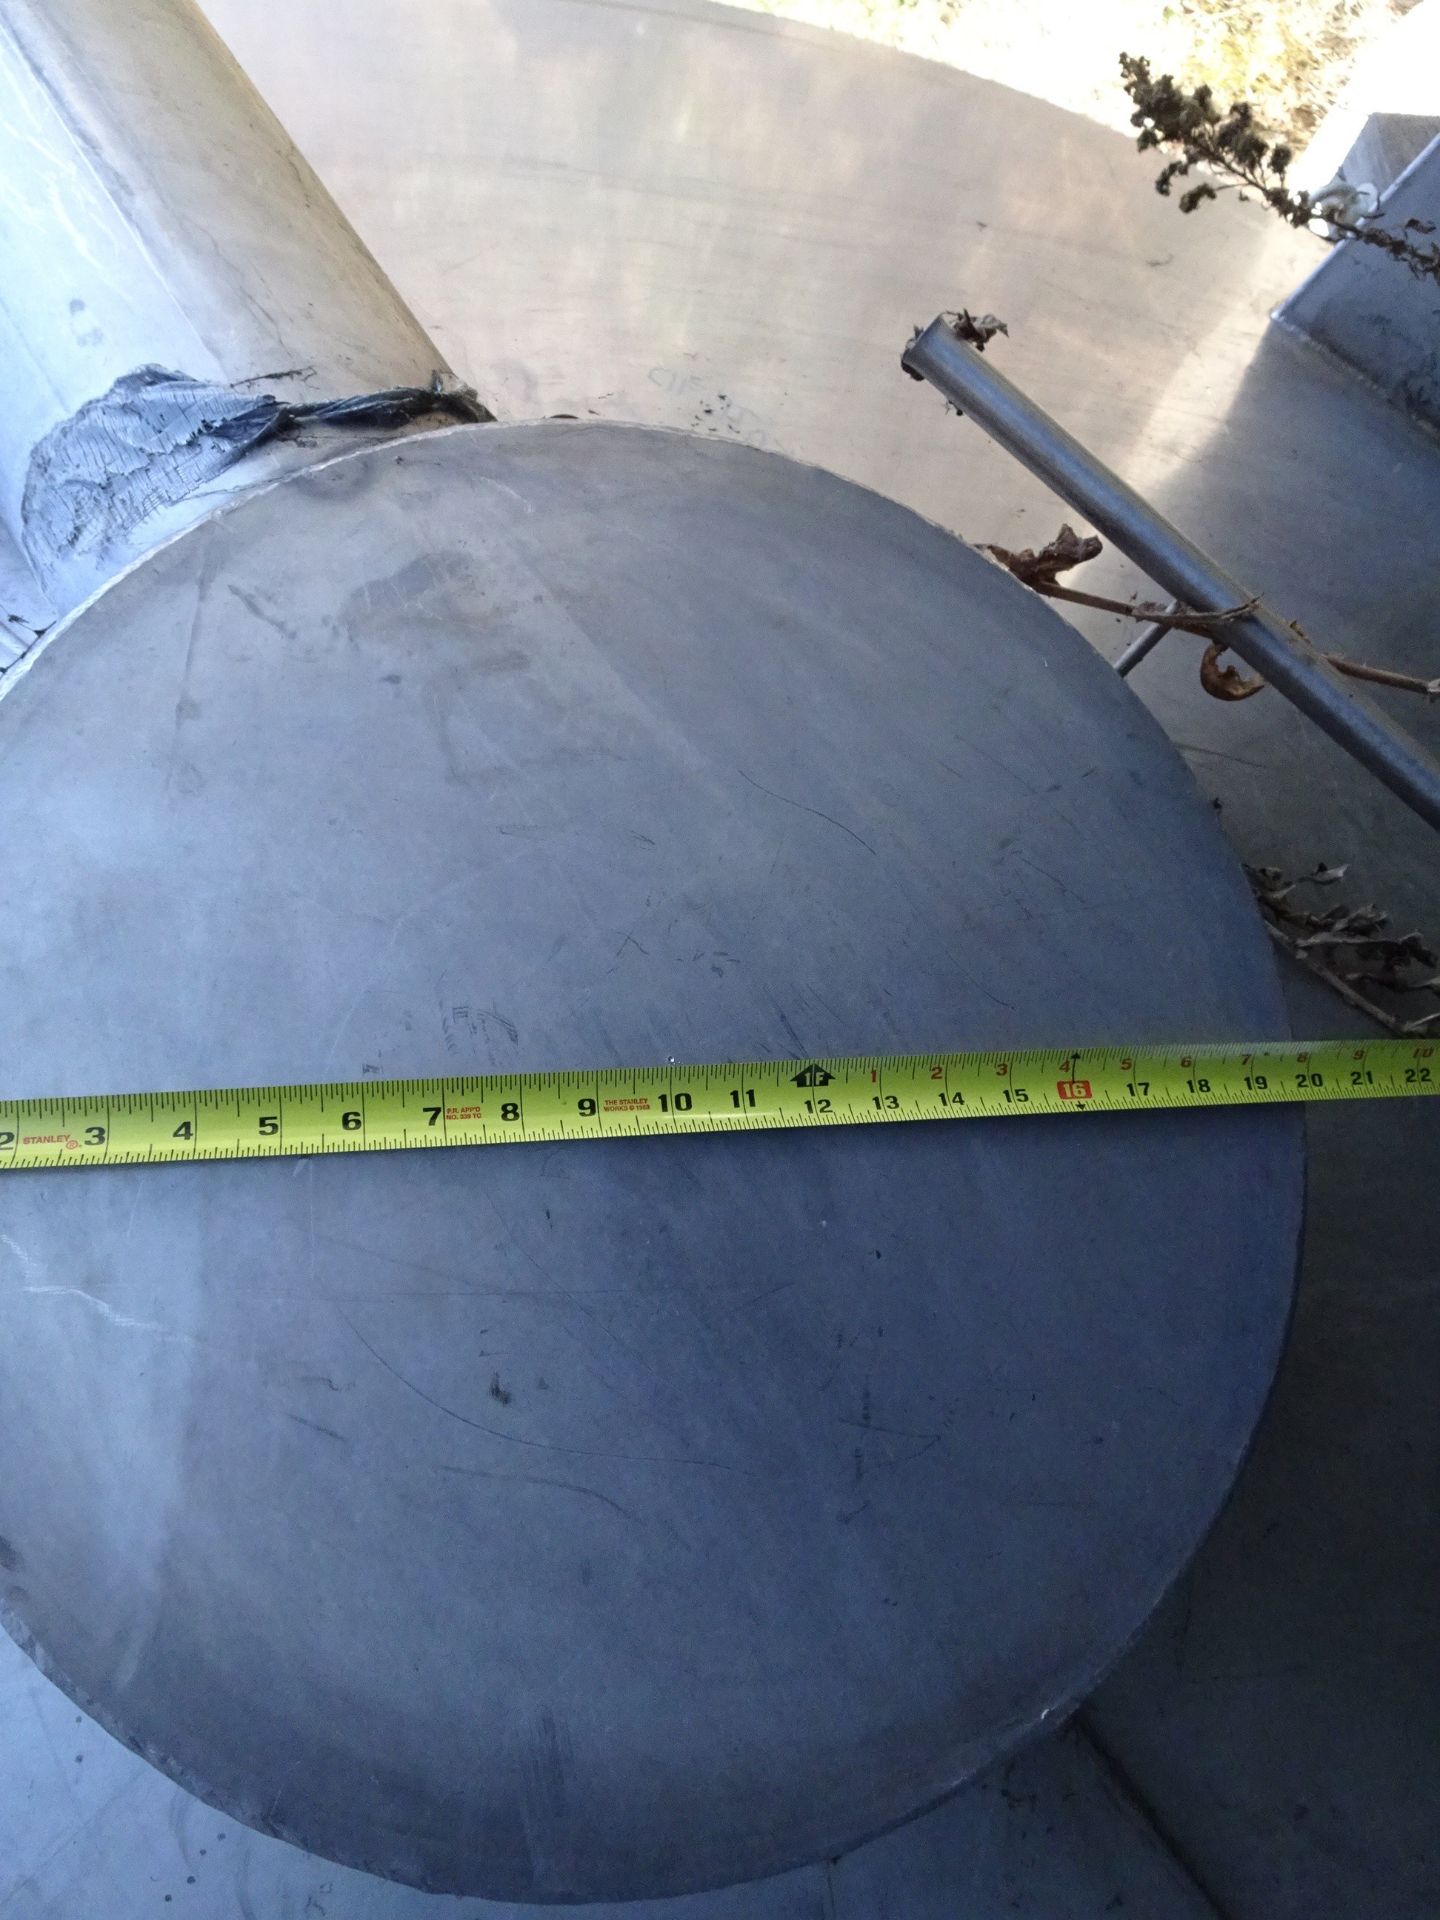 5000 Gallon Hot Water Storage Tank, Stainless Steel Single Wall Storage Tank For Ho - Contact Rigger - Image 20 of 21